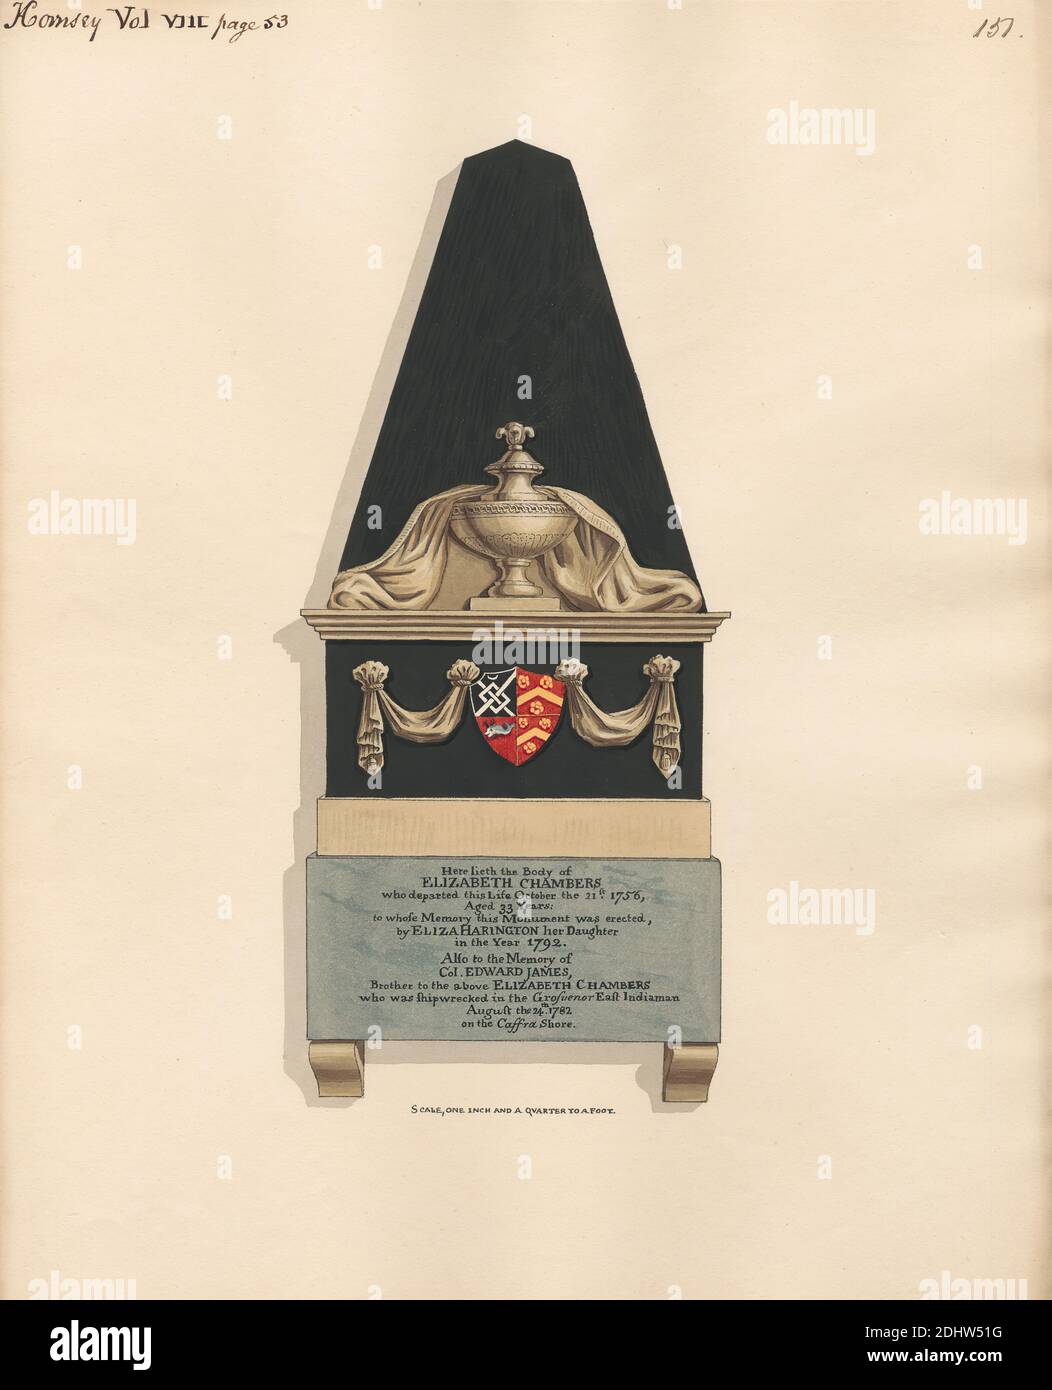 Memorial to Elizabeth Chambers and Col. Edward James, Attributed to Daniel Lysons, 1762–1834, British, between 1796 and 1811, Pen and black ink, watercolor and gouache over graphite on medium, slightly textured, cream wove paper, Sheet: 13 7/8 × 11 1/8 inches (35.2 × 28.3 cm), architectural subject, church, memorial, England, Greater London, London, United Kingdom Stock Photo